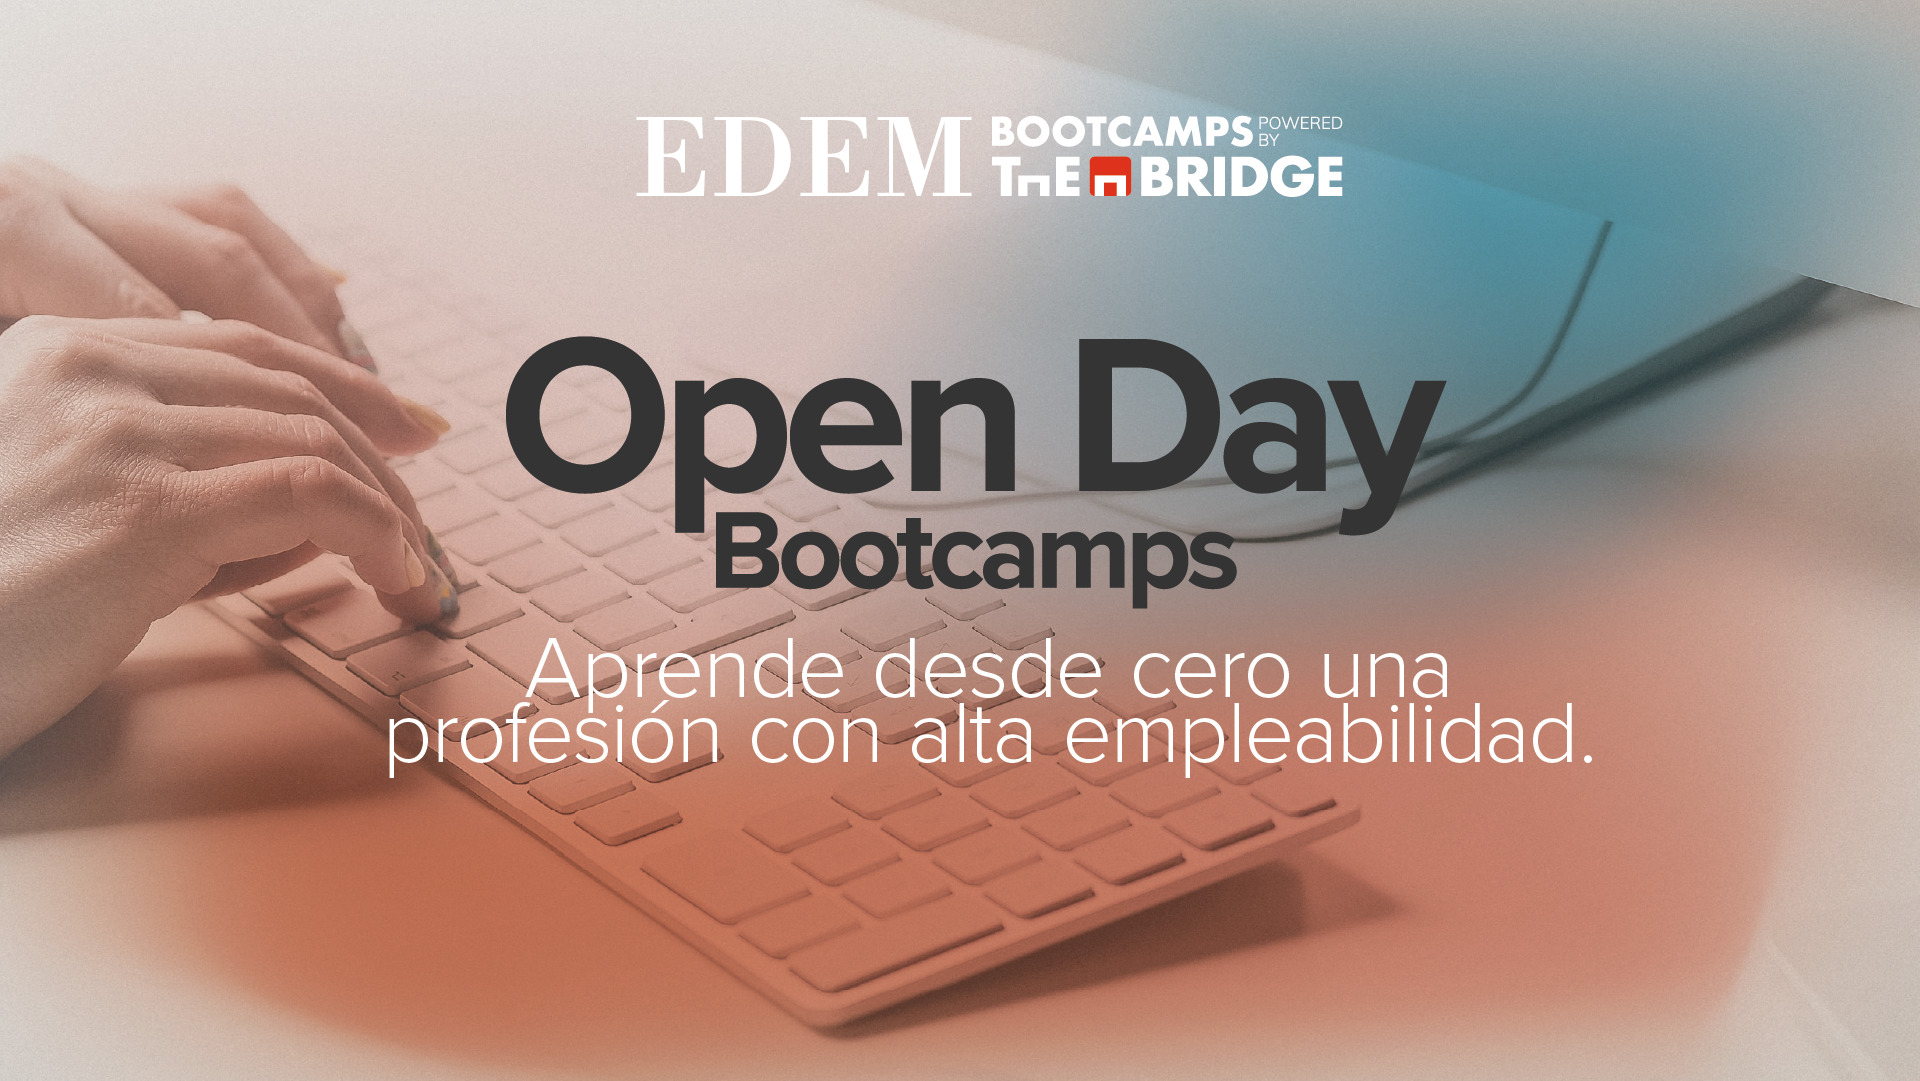 Open Day Bootcamps EDEM powered by The Bridge